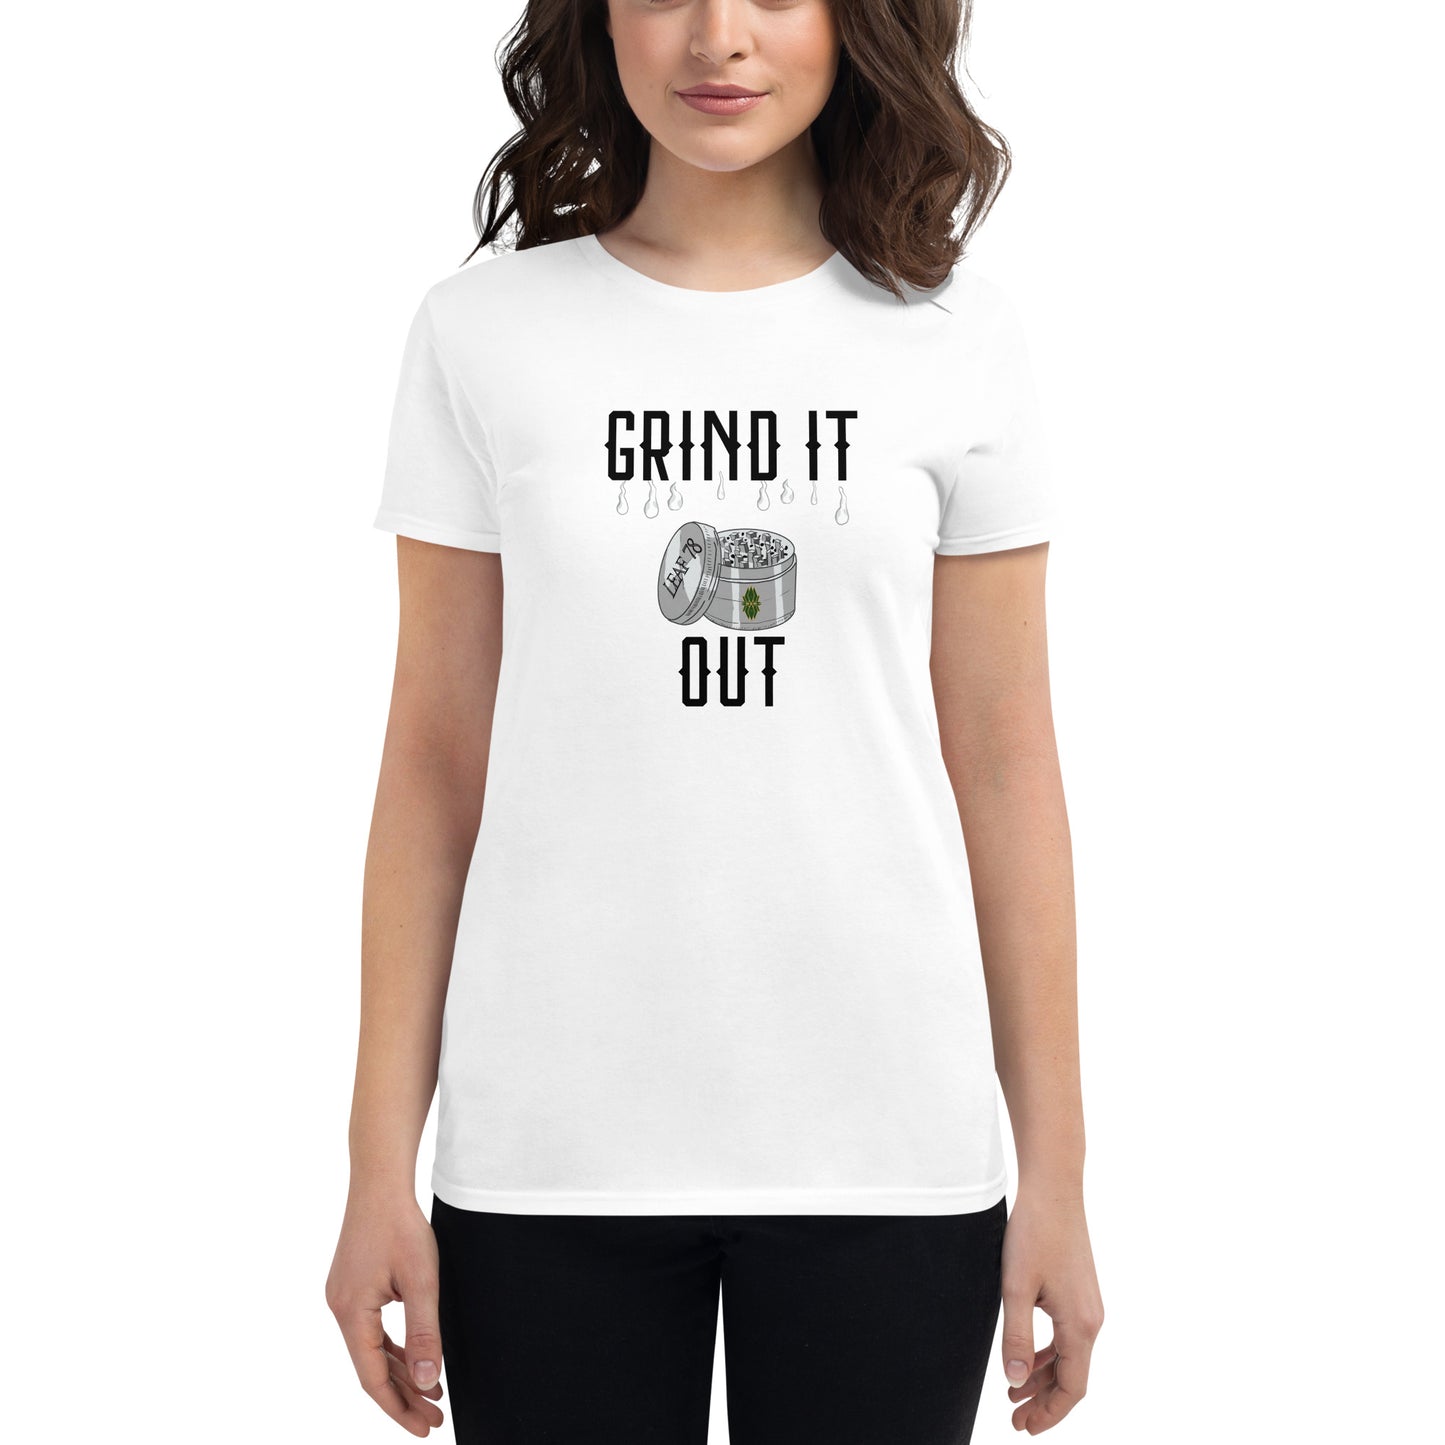 Grind It Out Fitted short sleeve t-shirt